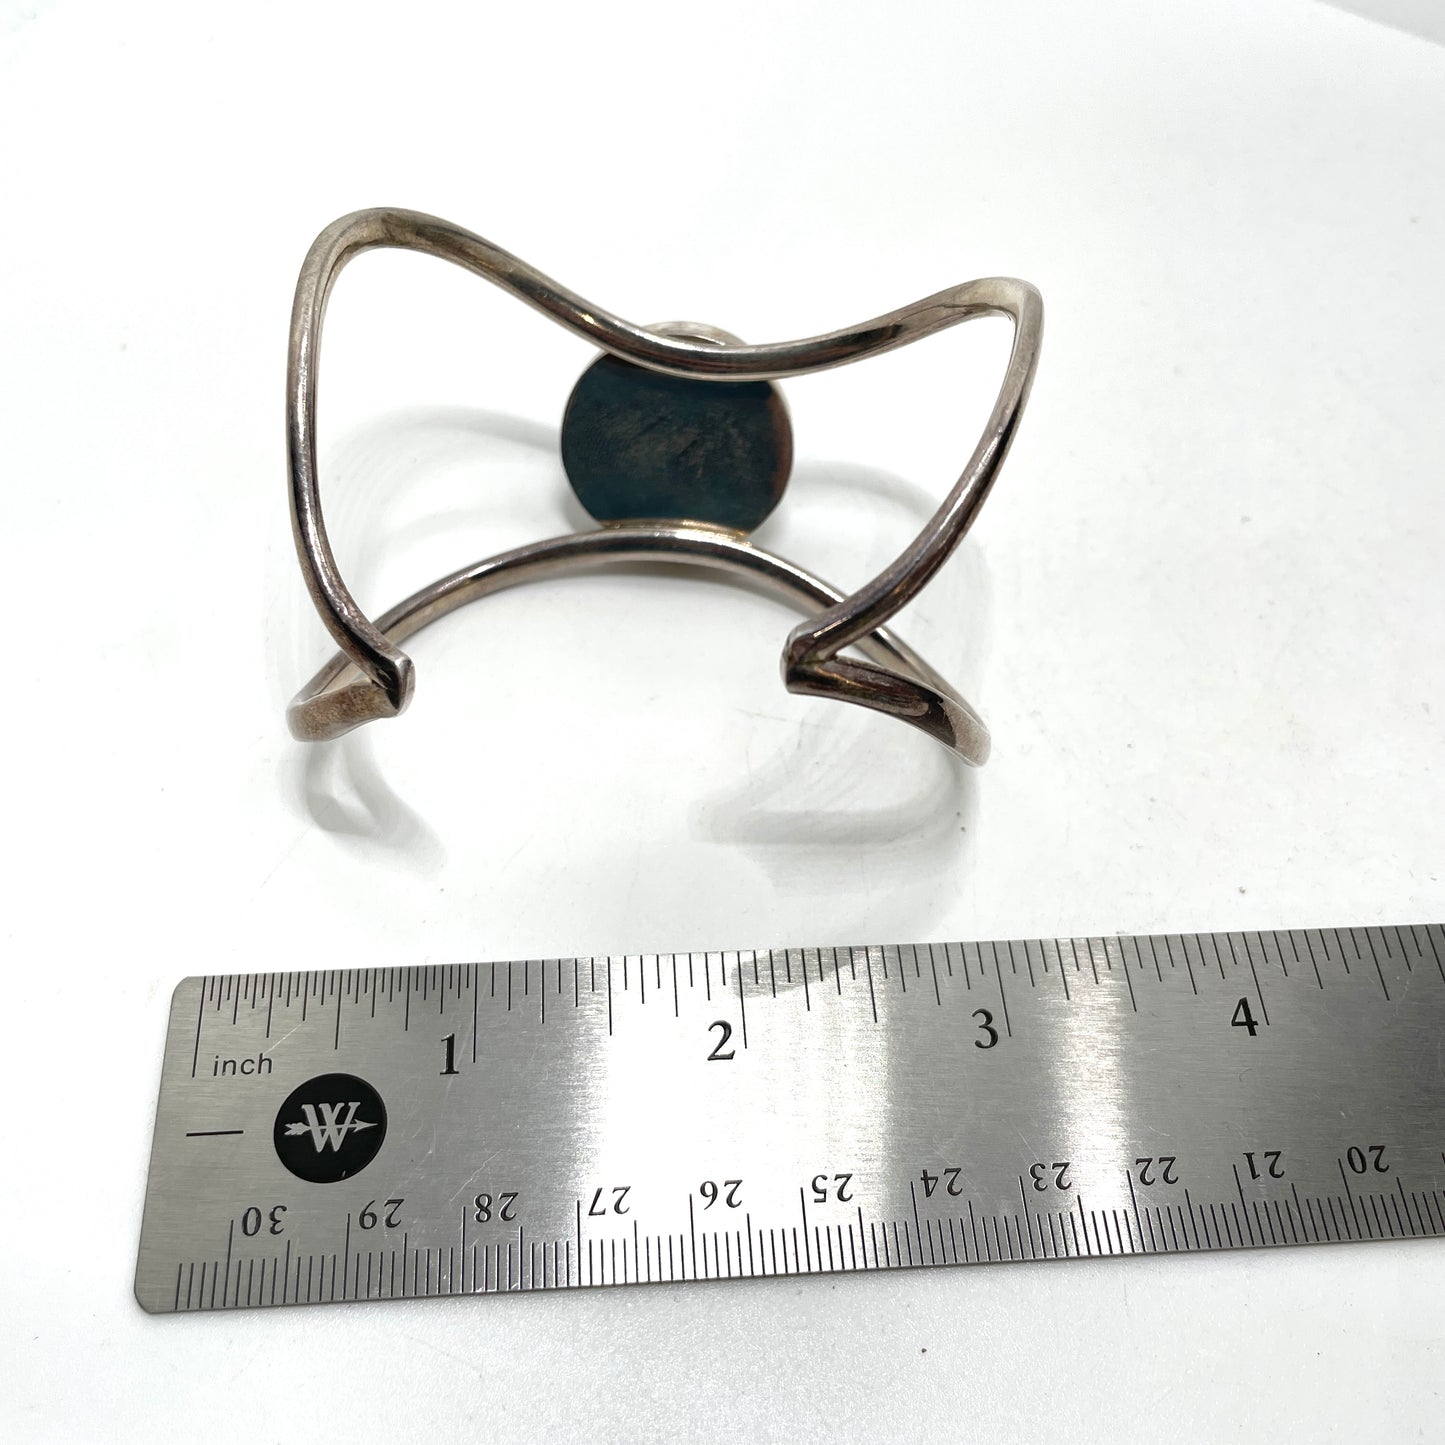 Vintage Mexican Sterling Silver & Abalone Cuff Bracelet